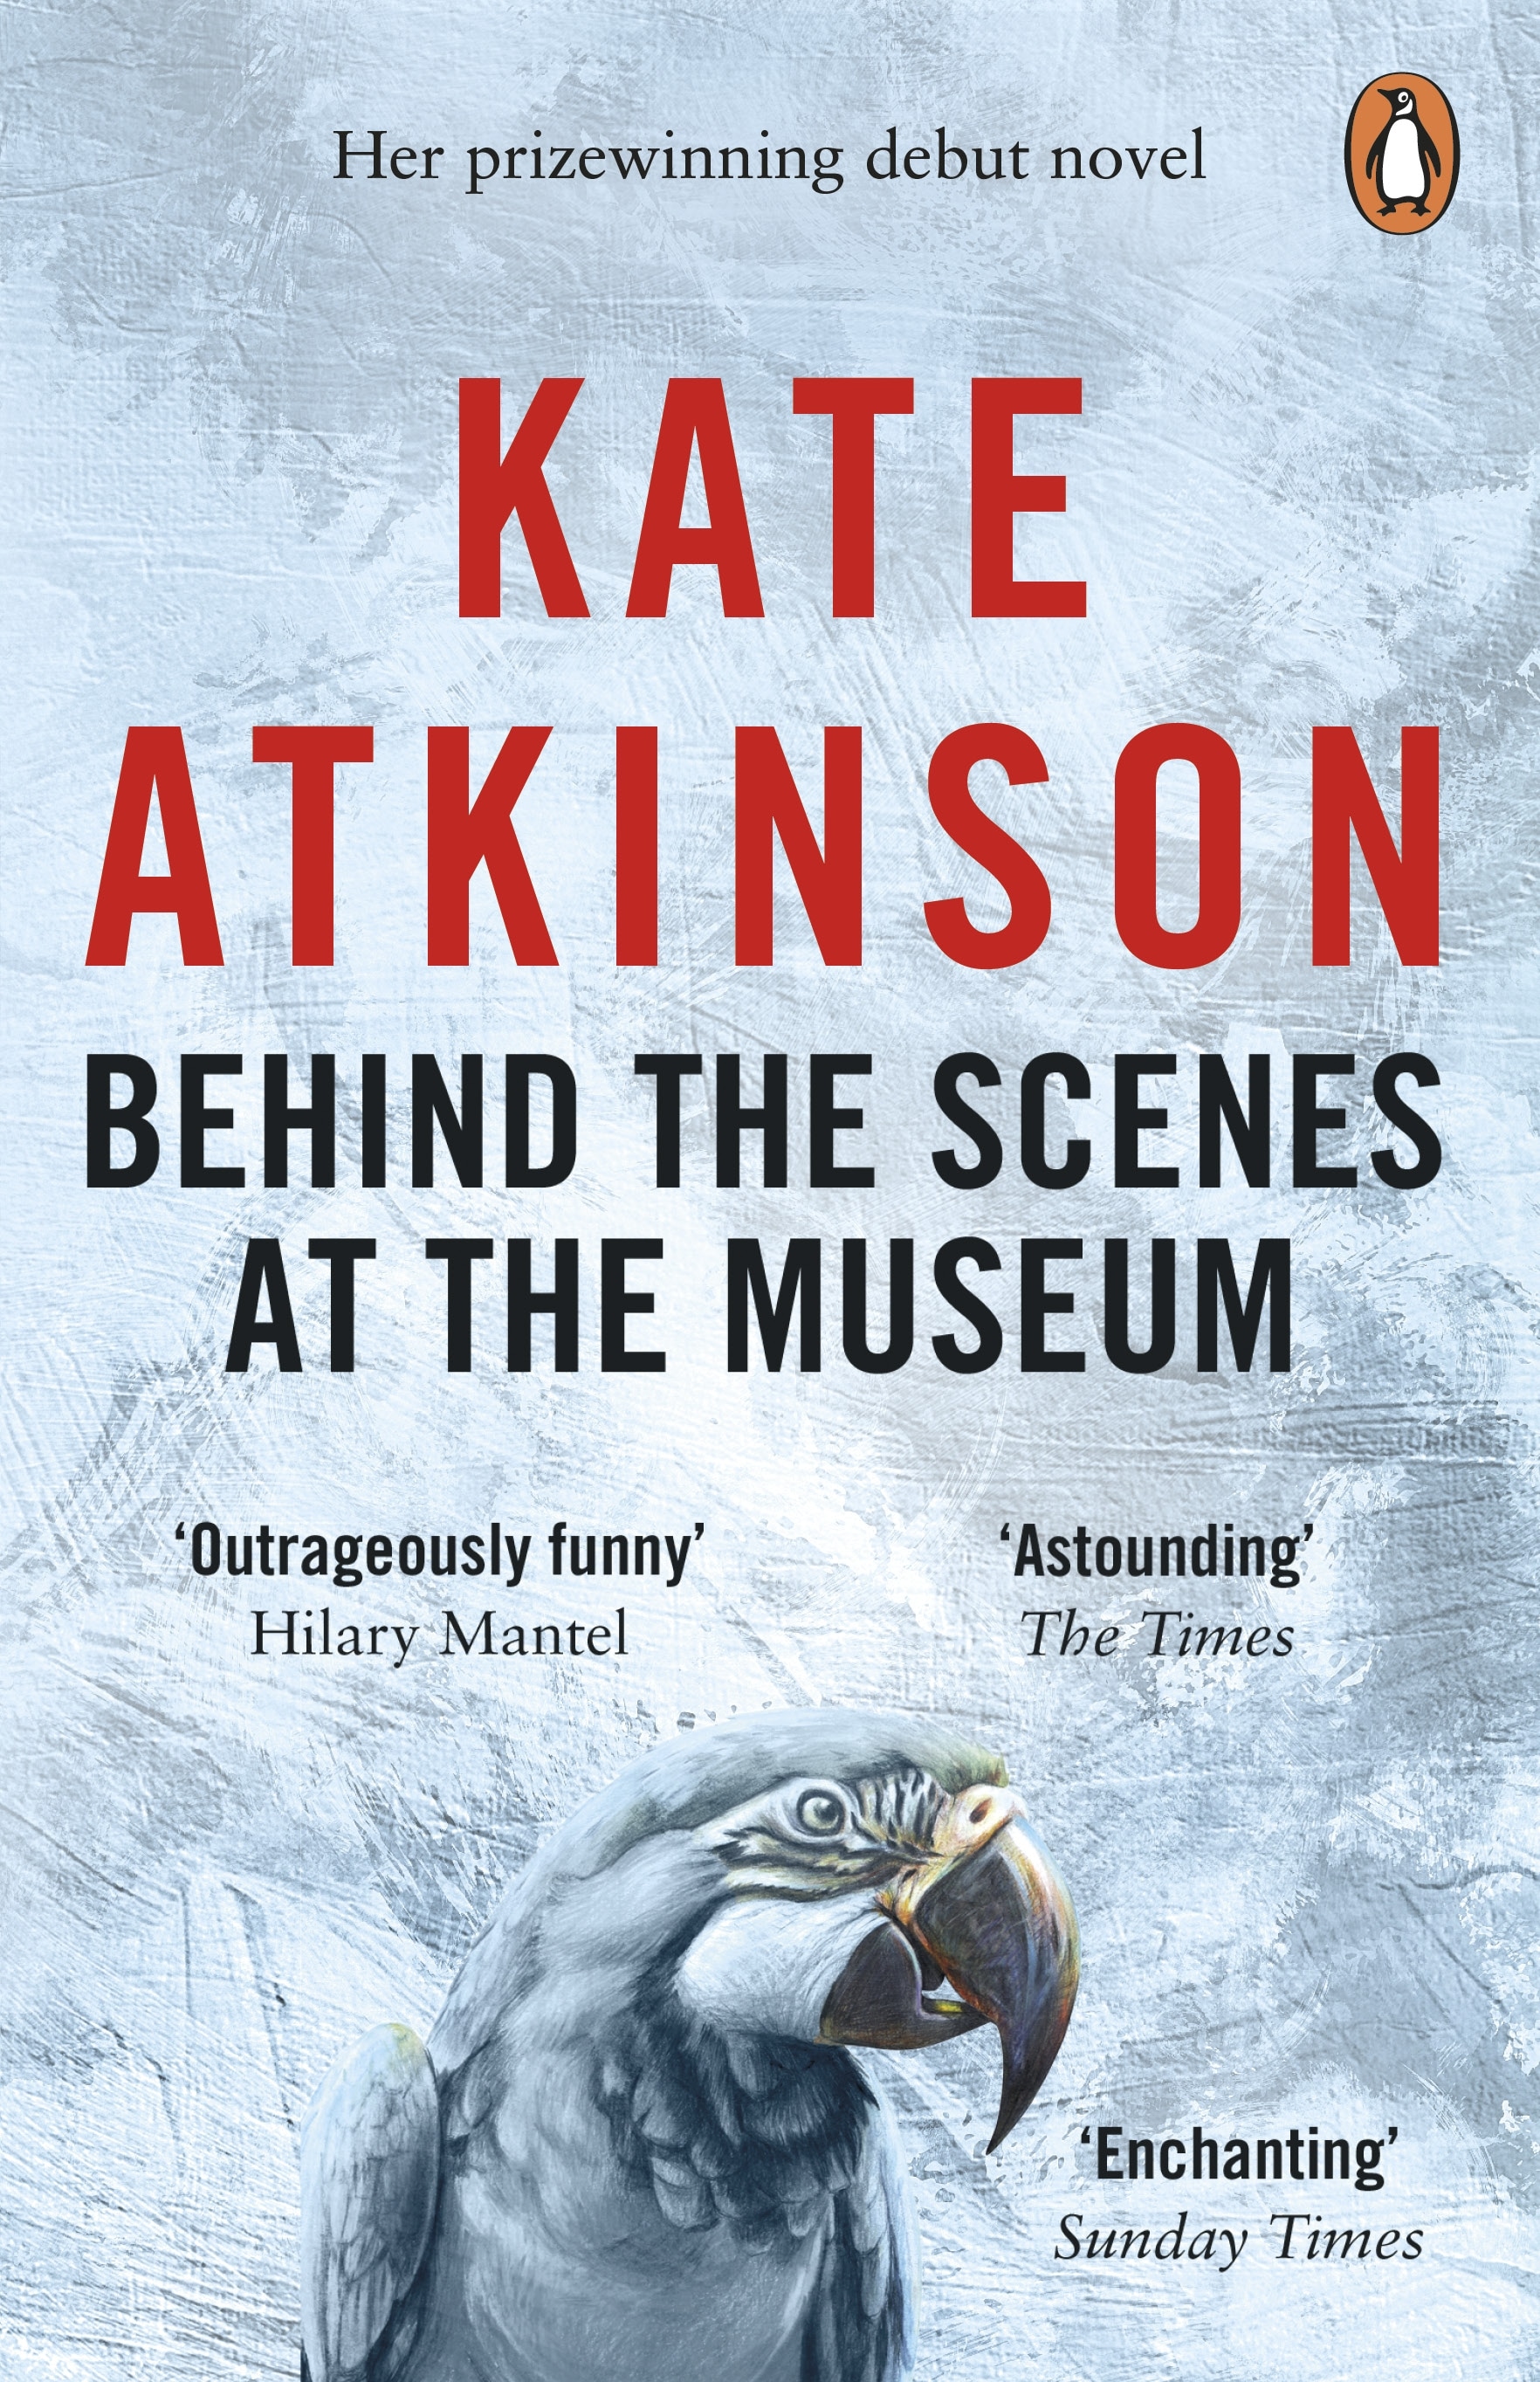 Book “Behind The Scenes At The Museum” by Kate Atkinson — January 1, 1996